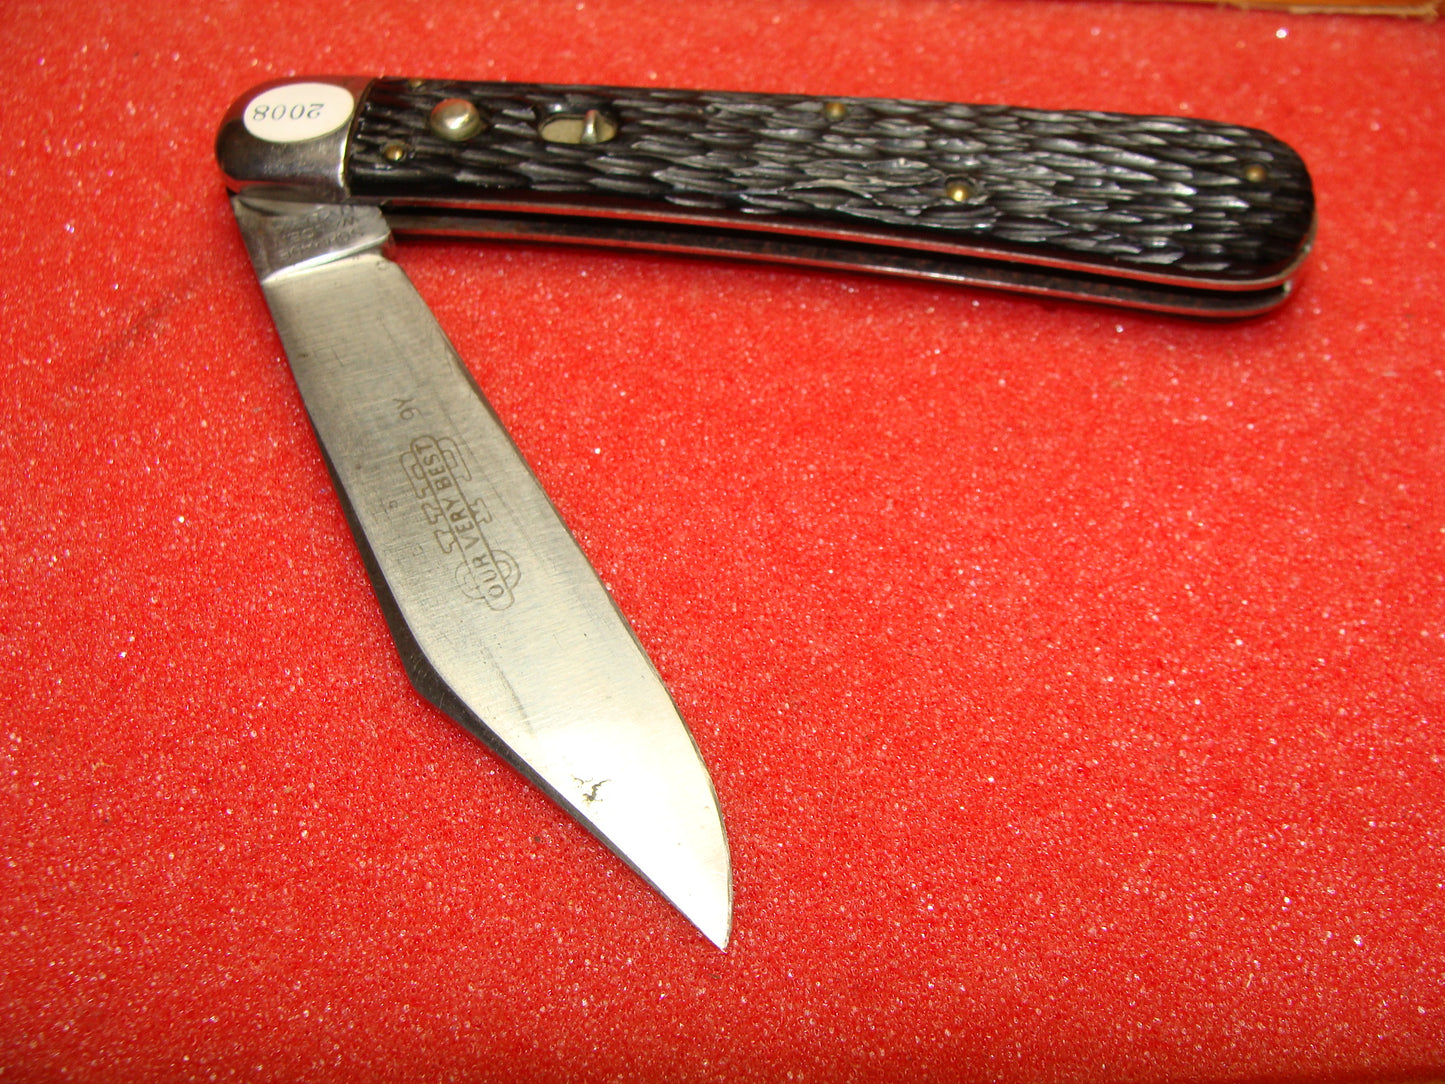 SCHRADE WALDEN NY USA 1950-56 OVB ETCH 4 7/8" VINTAGE AMERICAN AUTOMATIC KNIFE BLACK JIGGED COMPOSITION HANDLES